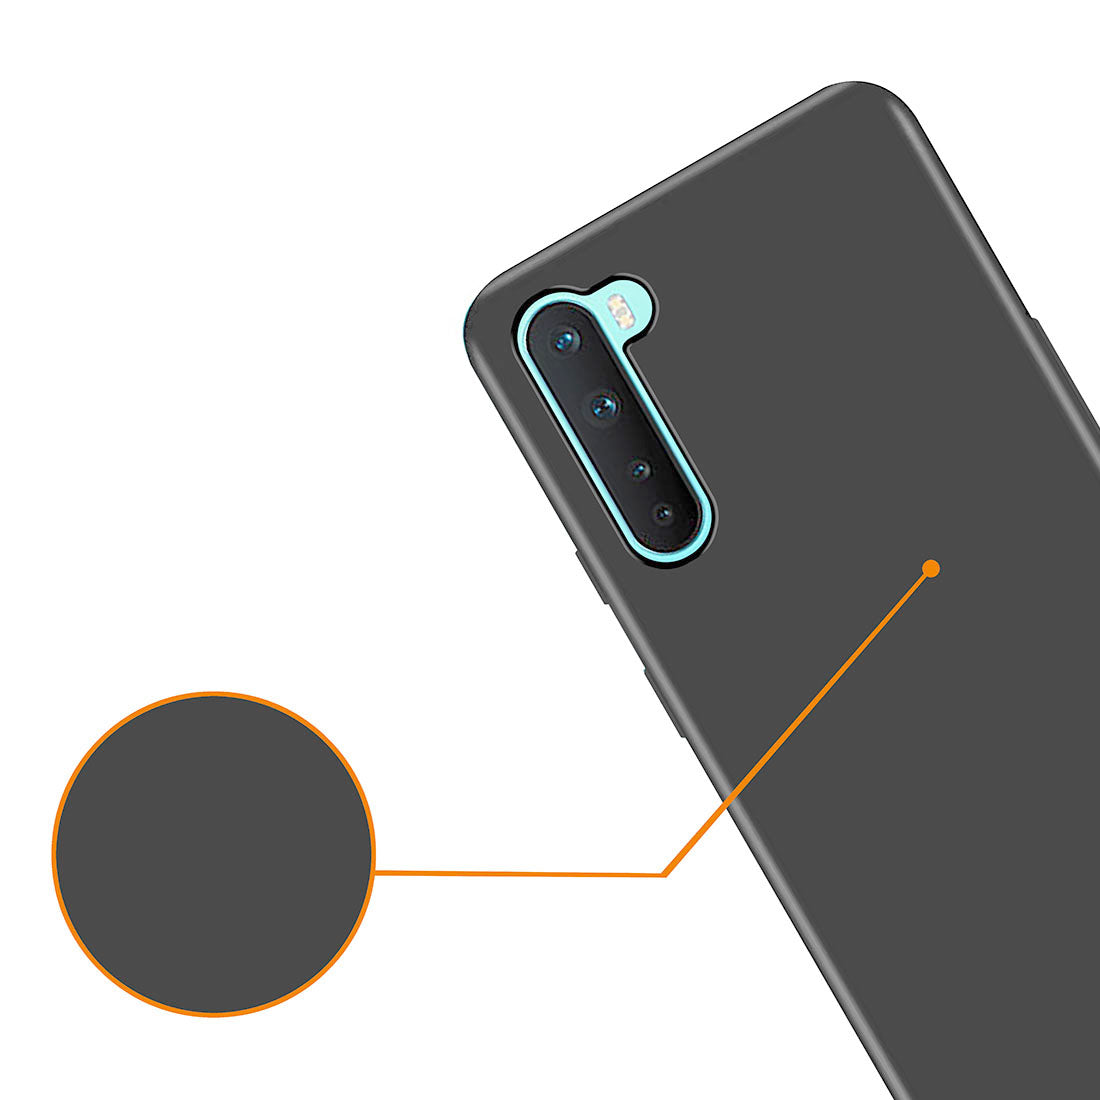 Matte Finish TPU Back Cover for OnePlus Nord